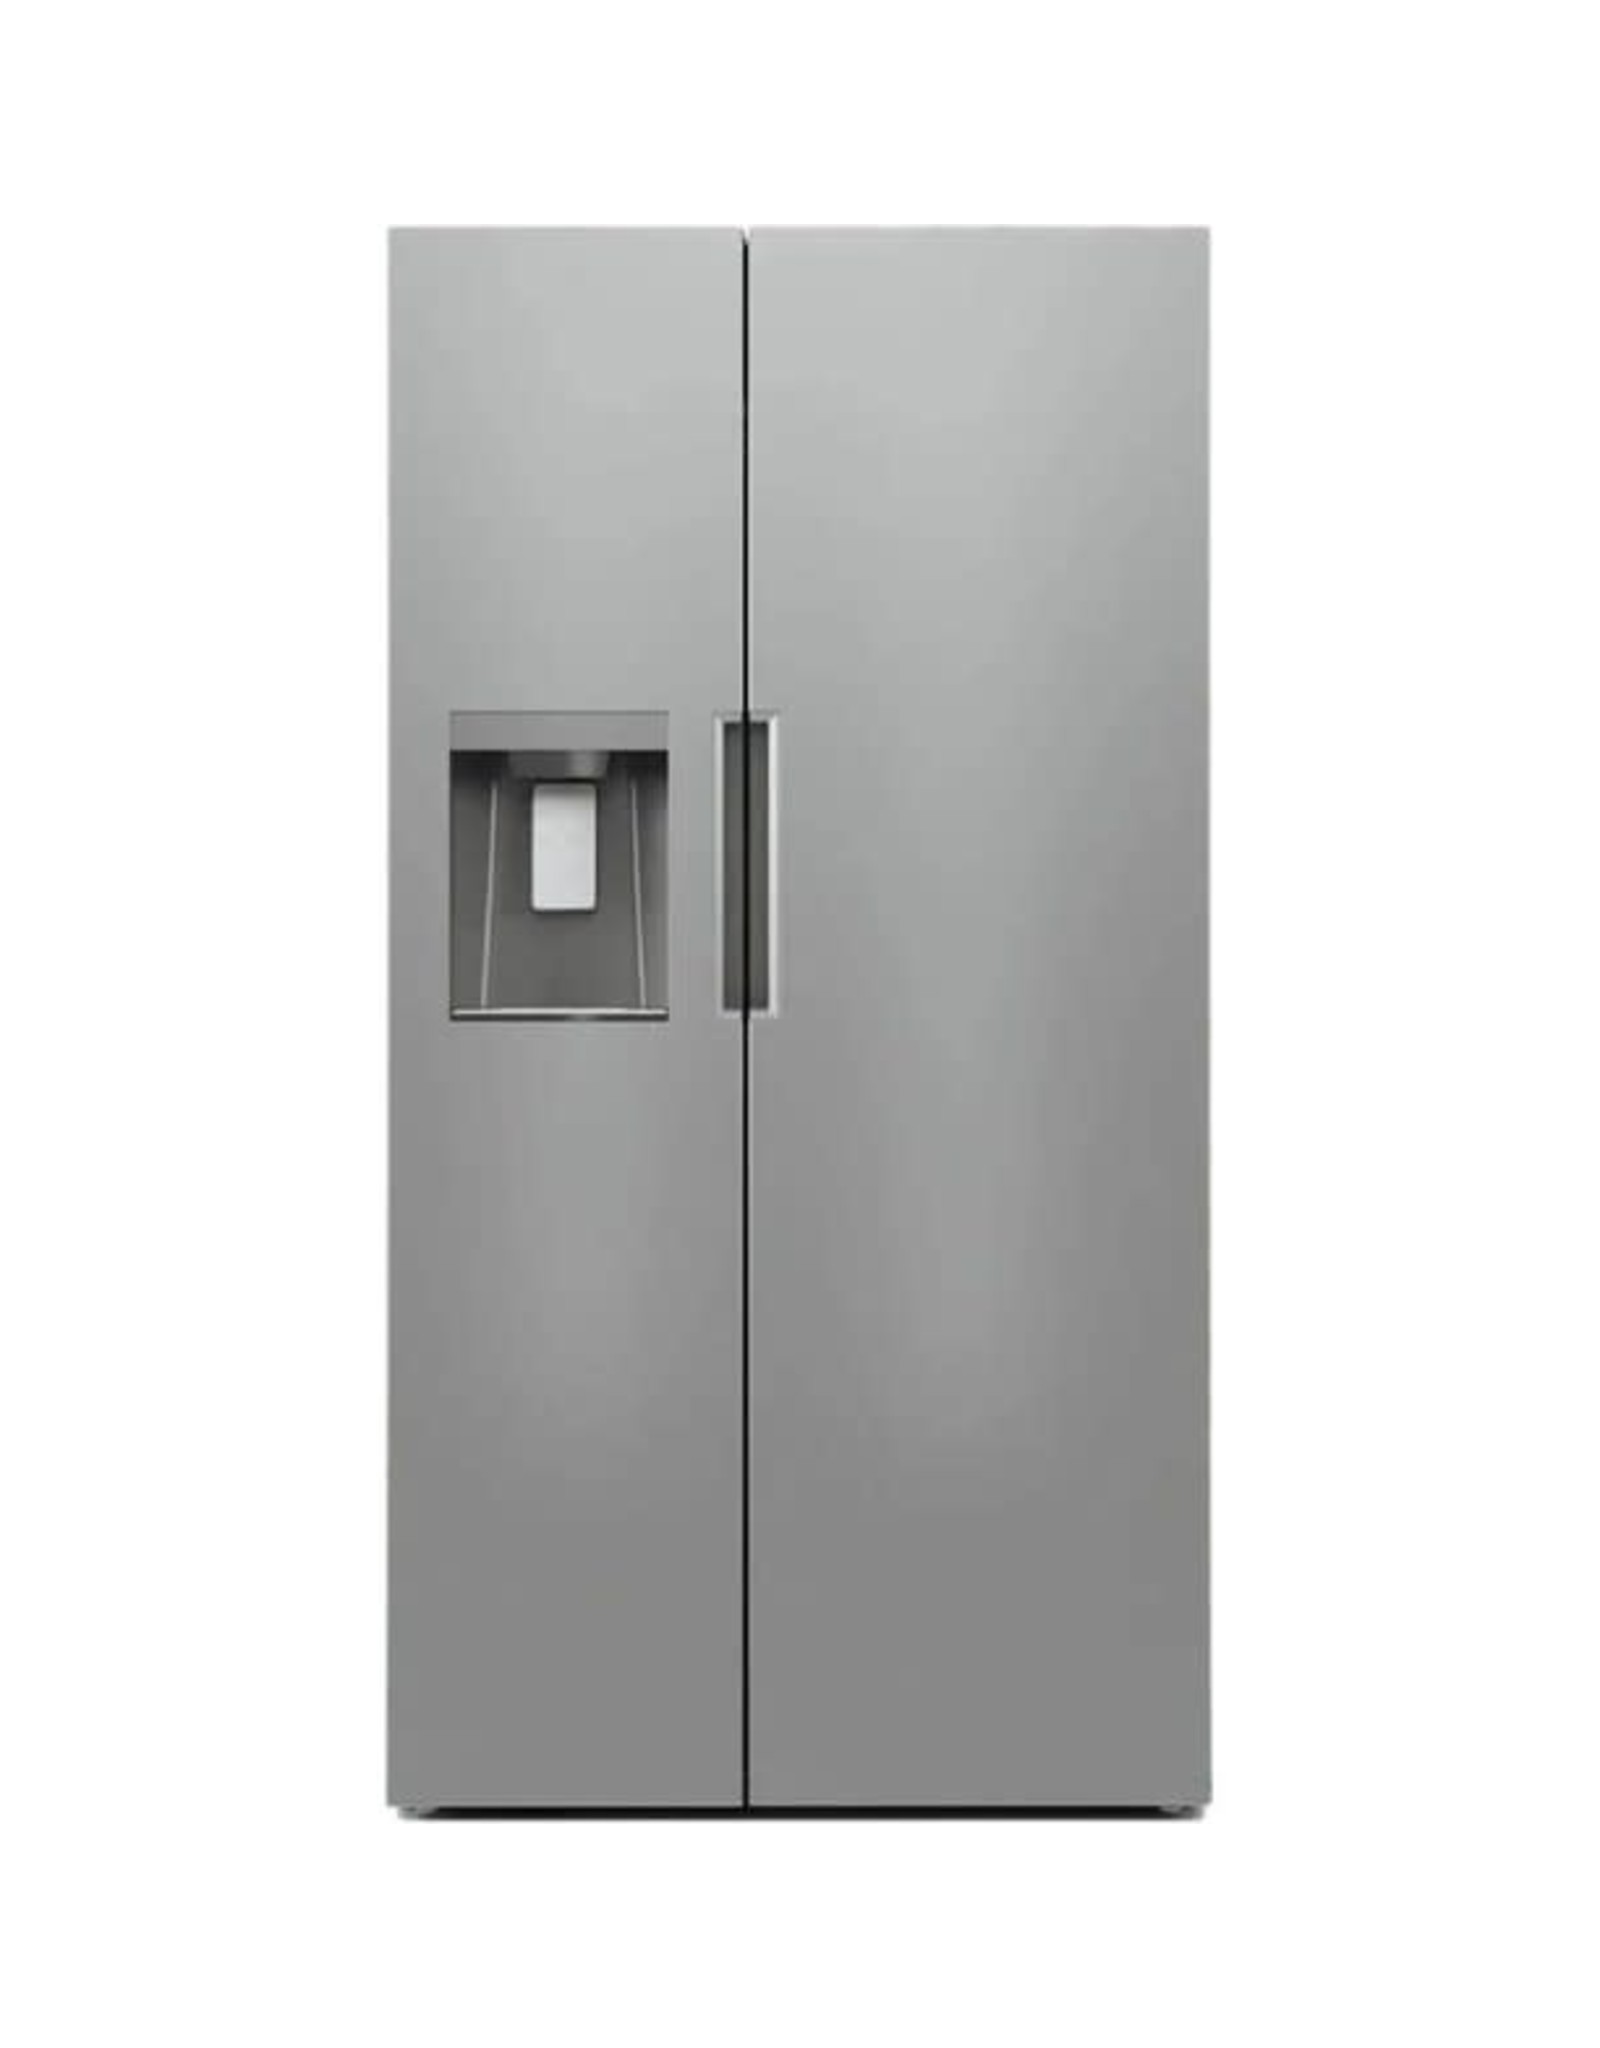 Midea MRS26D5AST  Midea  26.3-cu ft Side-by-Side Refrigerator with Ice Maker (Stainless Steel)